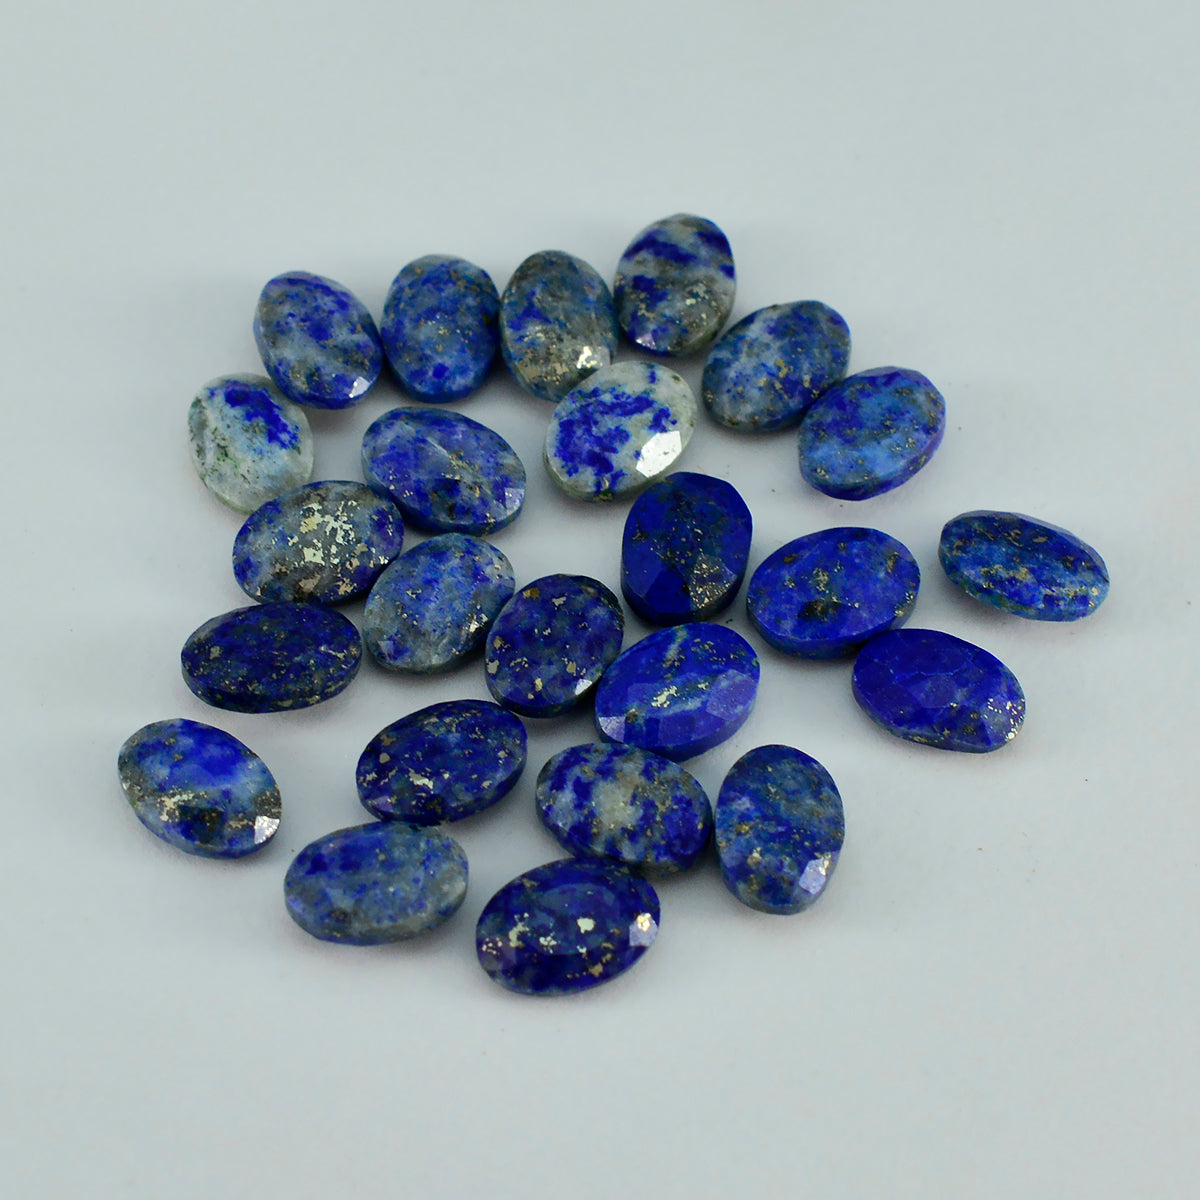 Riyogems 1PC Real Blue Lapis Lazuli Faceted 6x8 mm Oval Shape good-looking Quality Stone